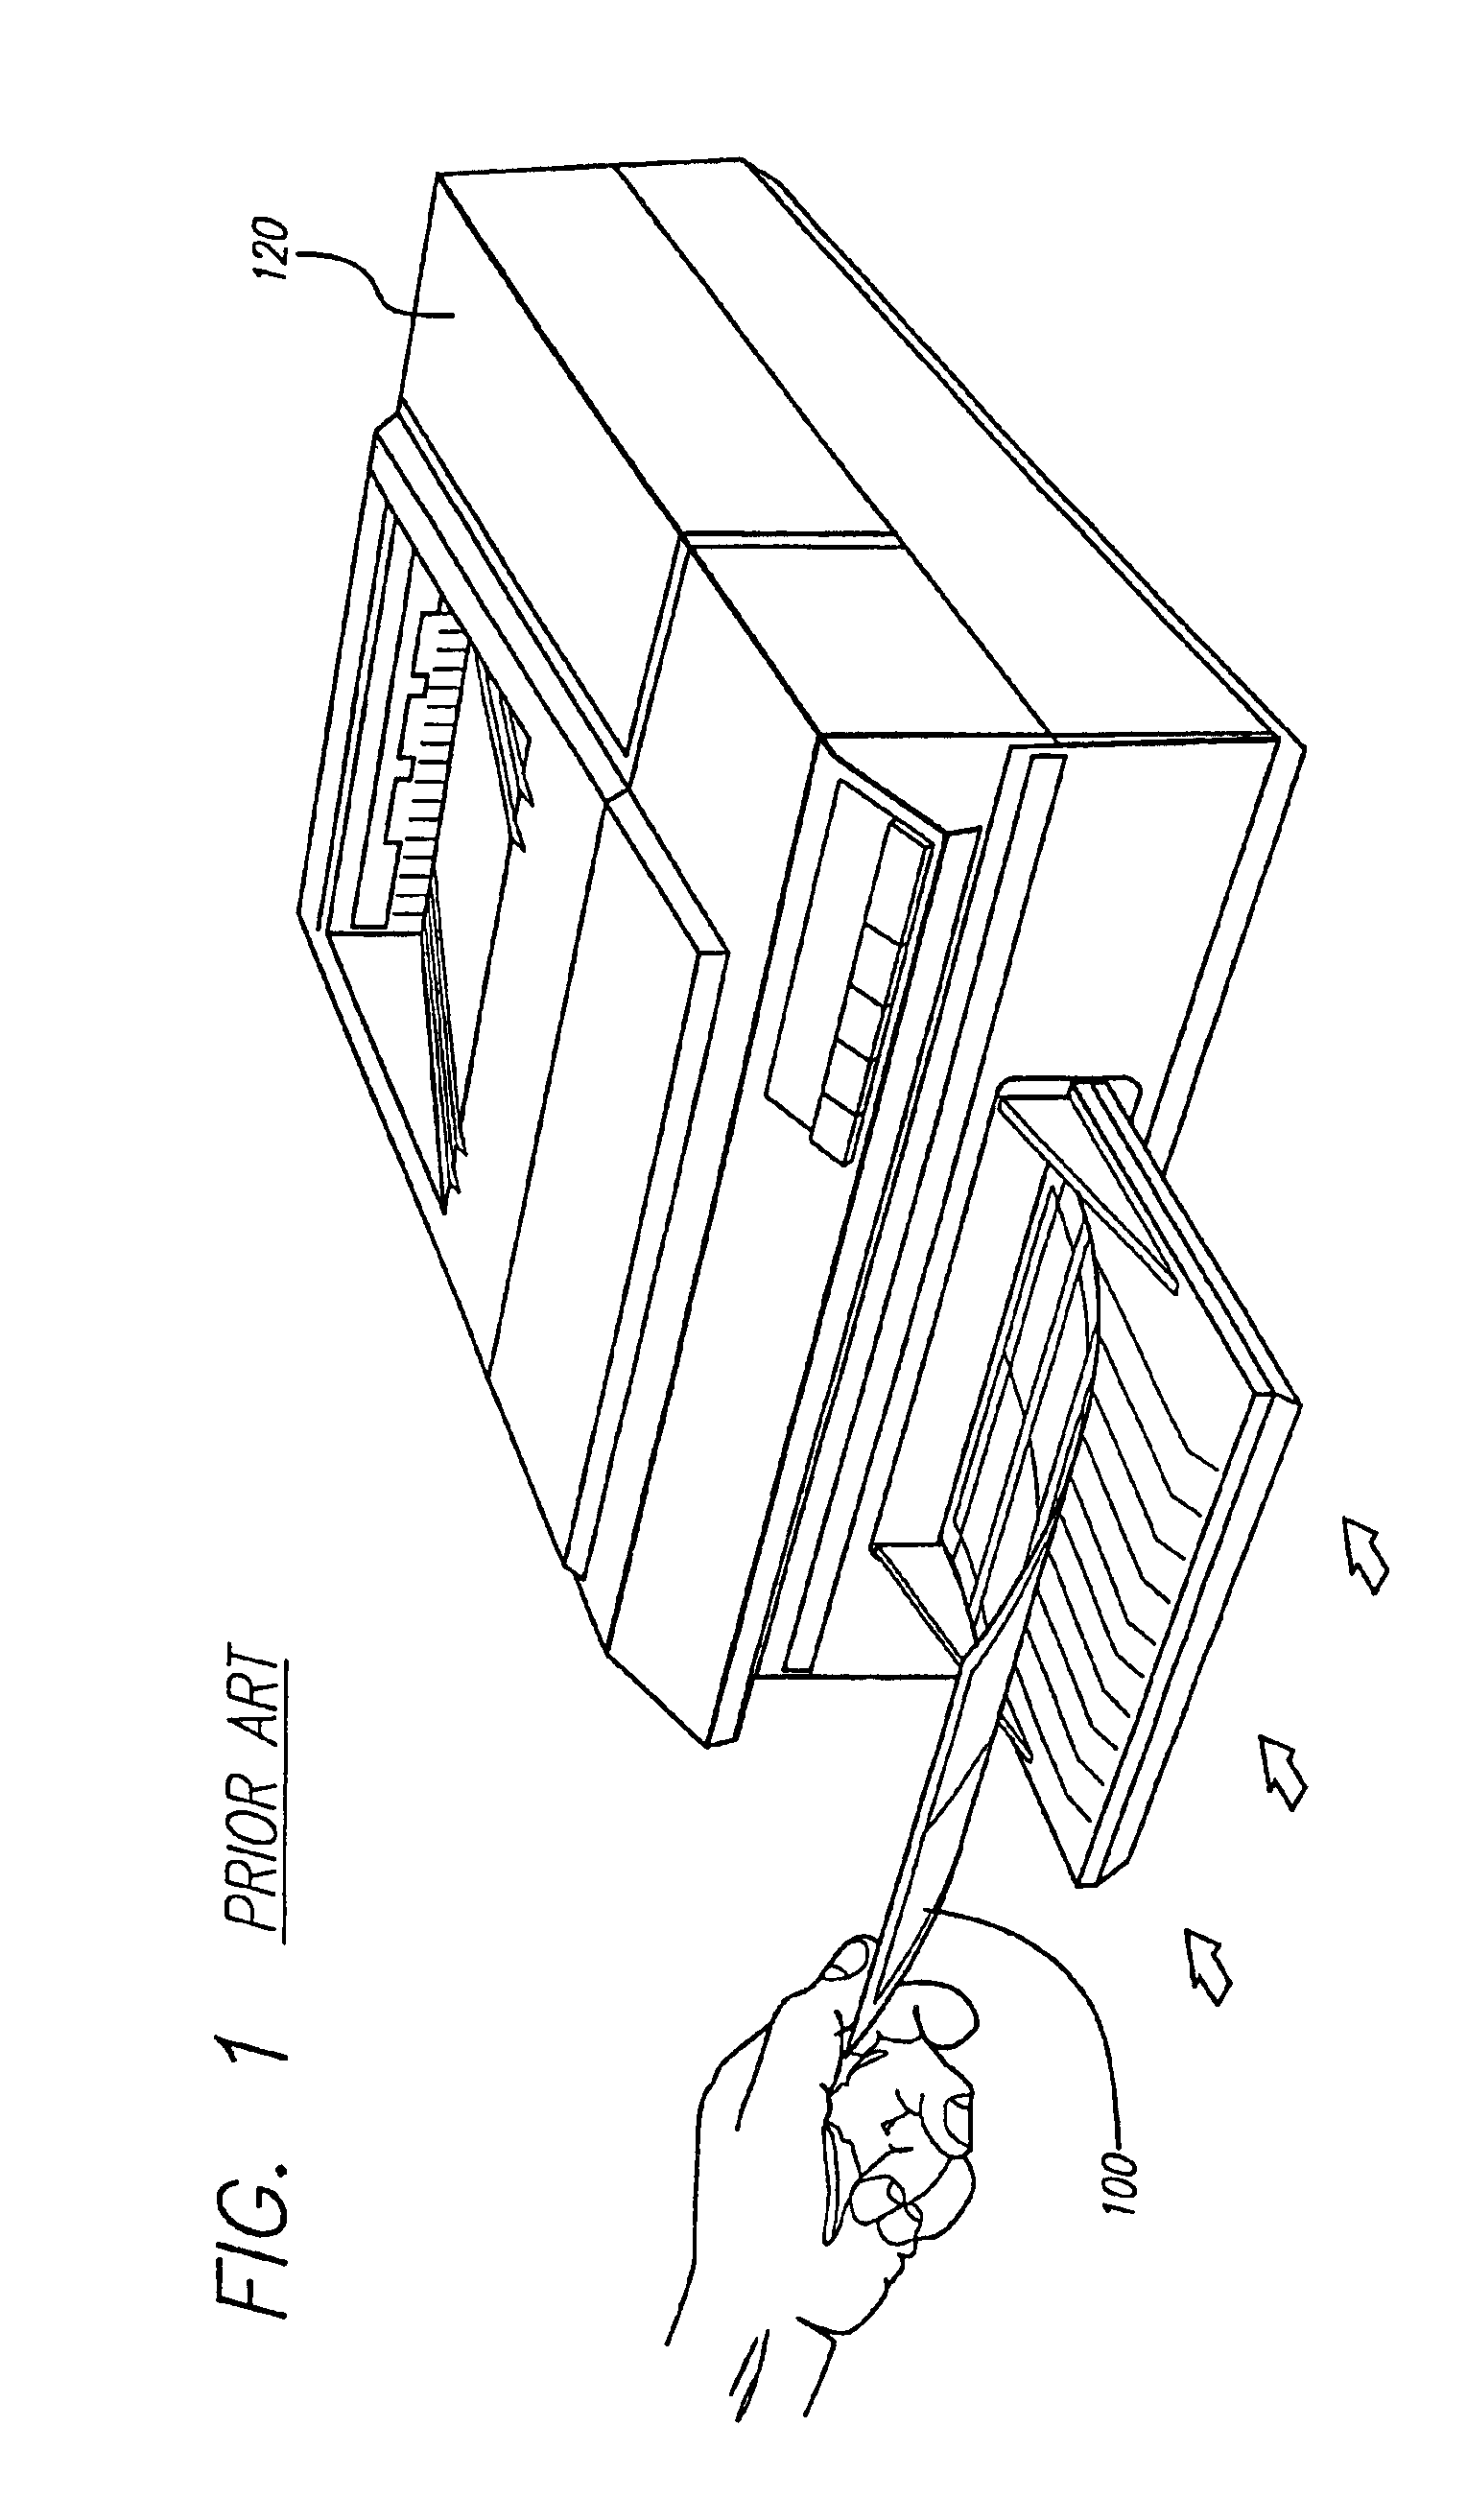 Method of forming sheets of printable media